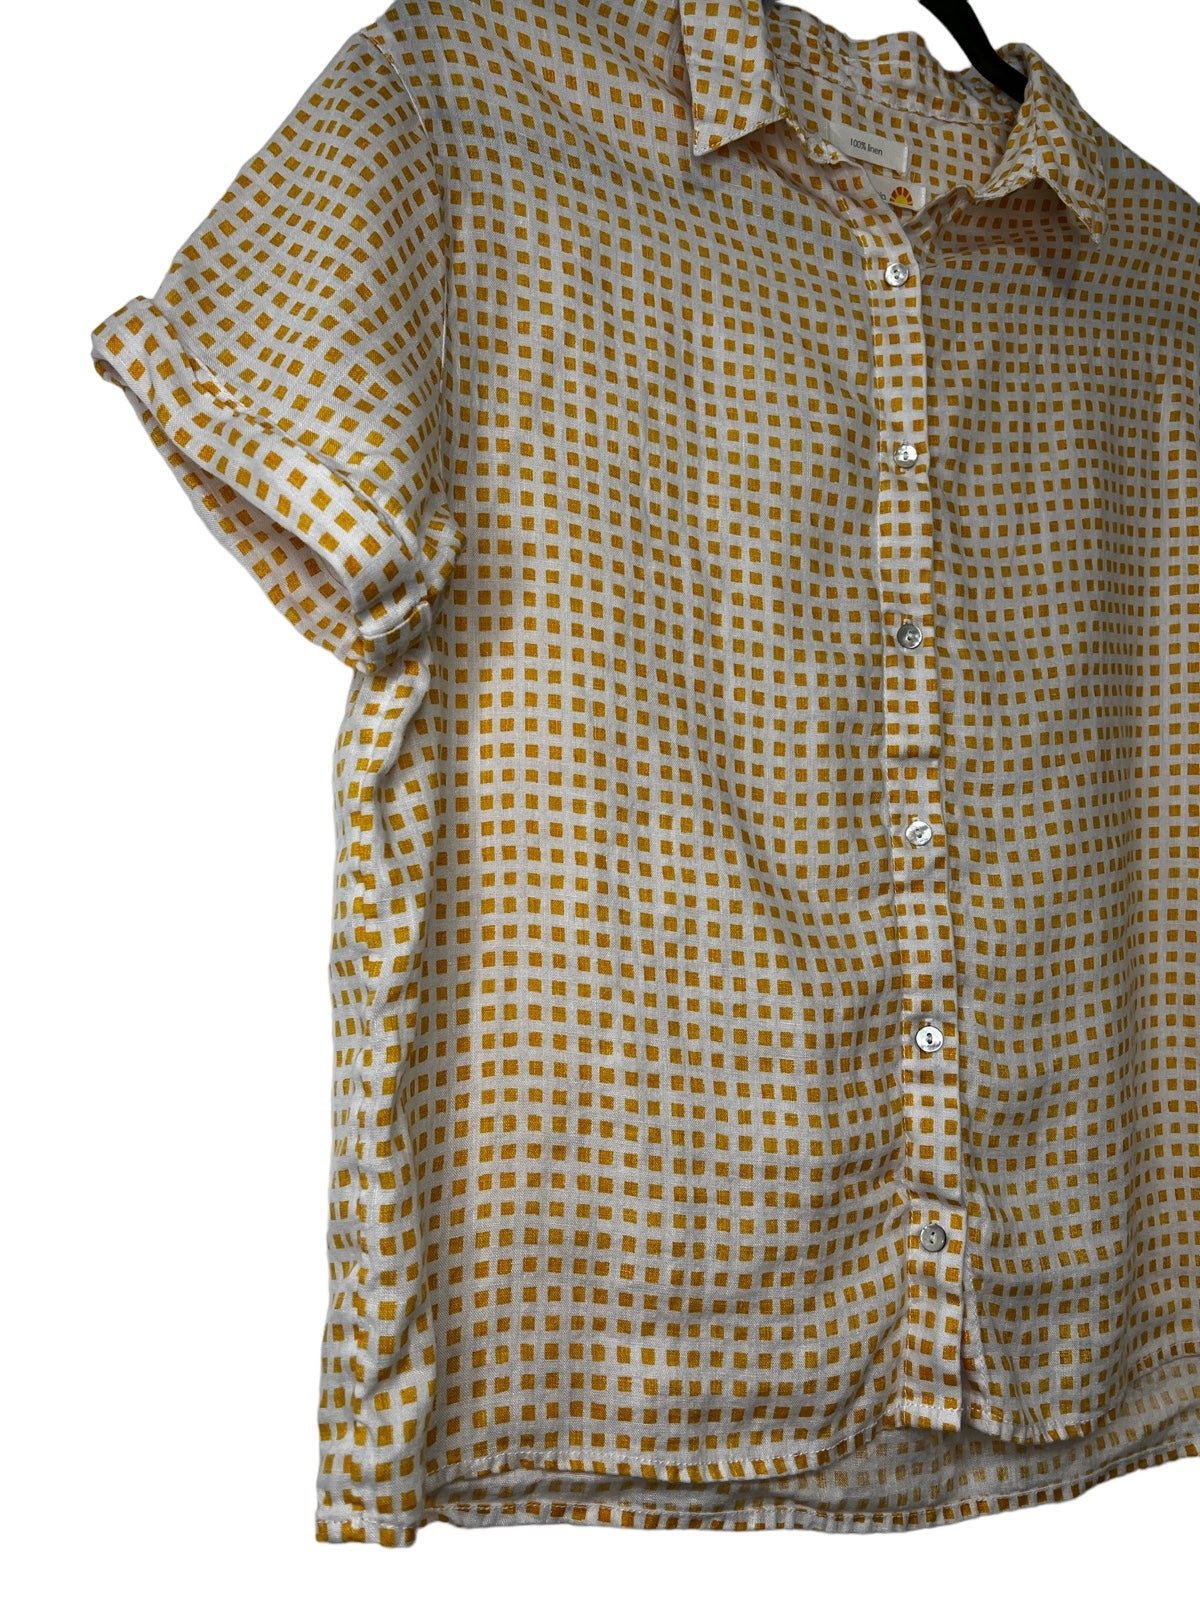 large discount C&C California 100% Linen Gingham Orange and White Button Down Short Sleeve Top peeXdU667 online store